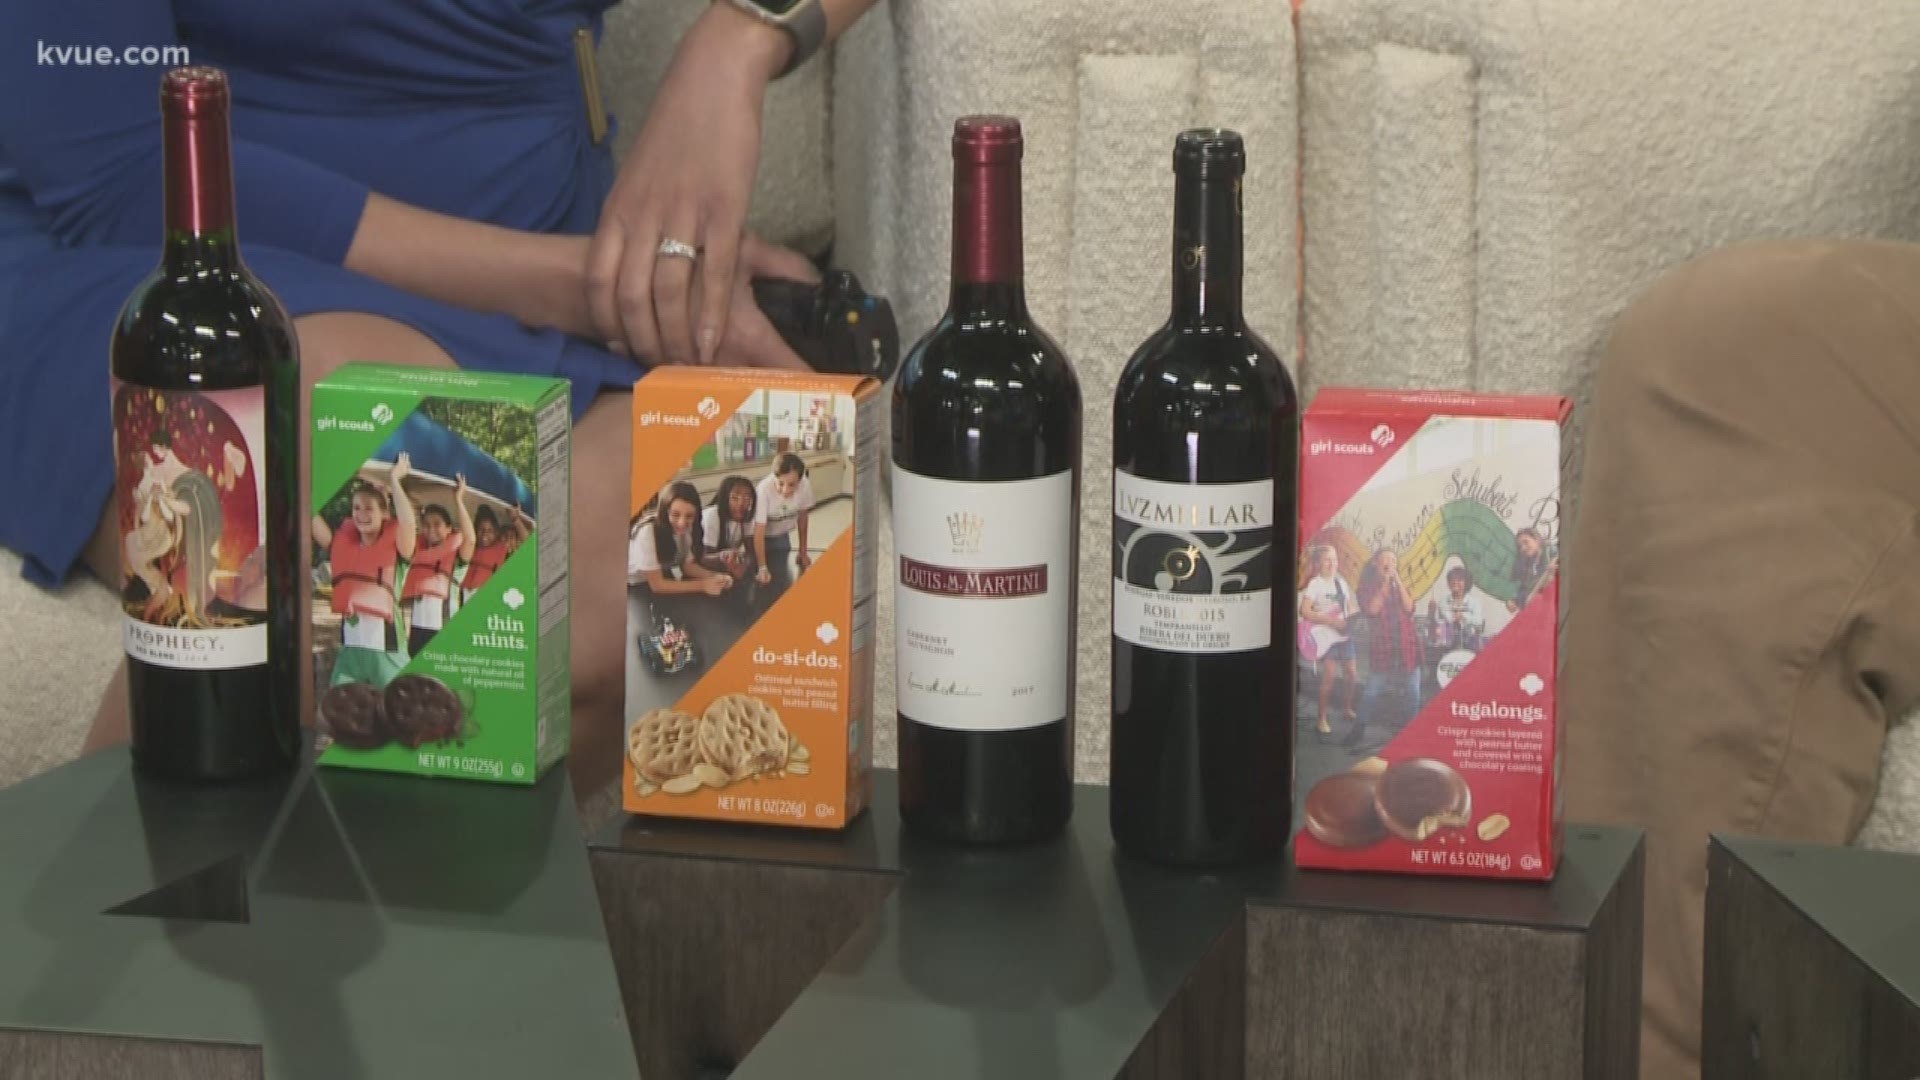 Lewis Smith from The Brass Tap Domain shows us what adult drinks can be best paired with a few Girl Scout cookies.